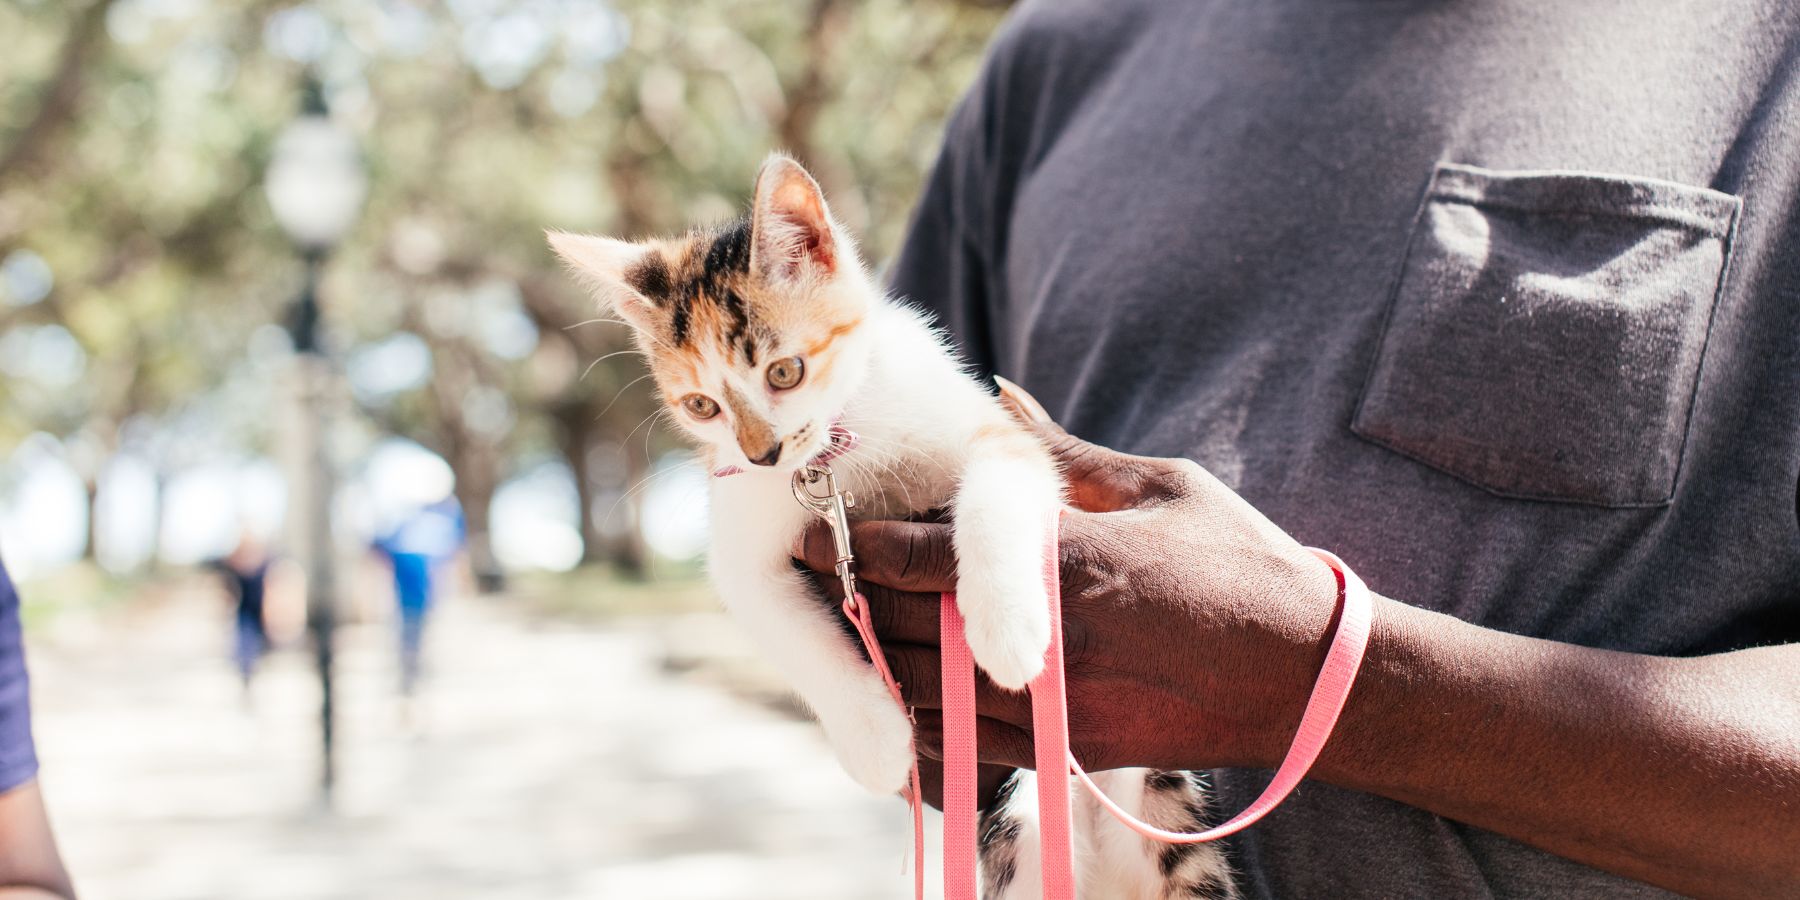 Measuring Kittens for Harnesses: What's Different?